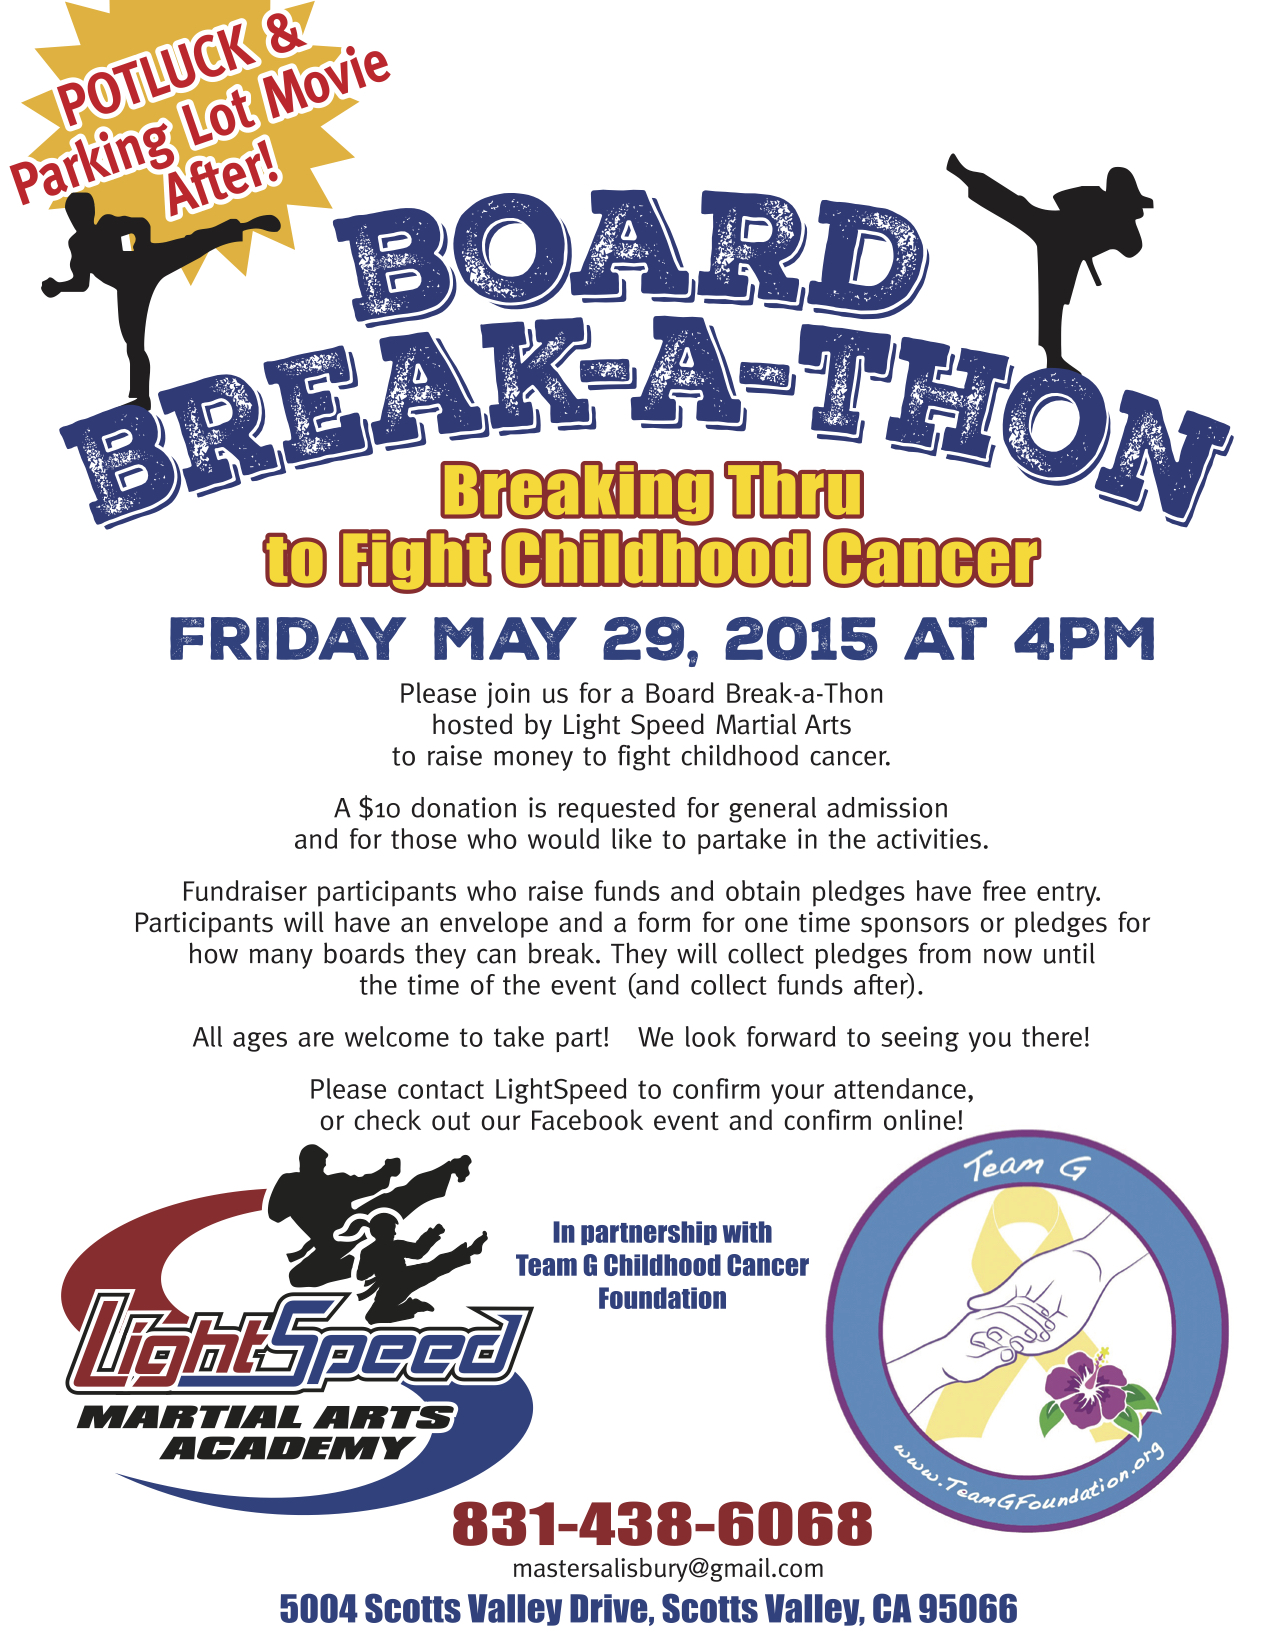 Breaking Boards to Fight Childhood Cancer